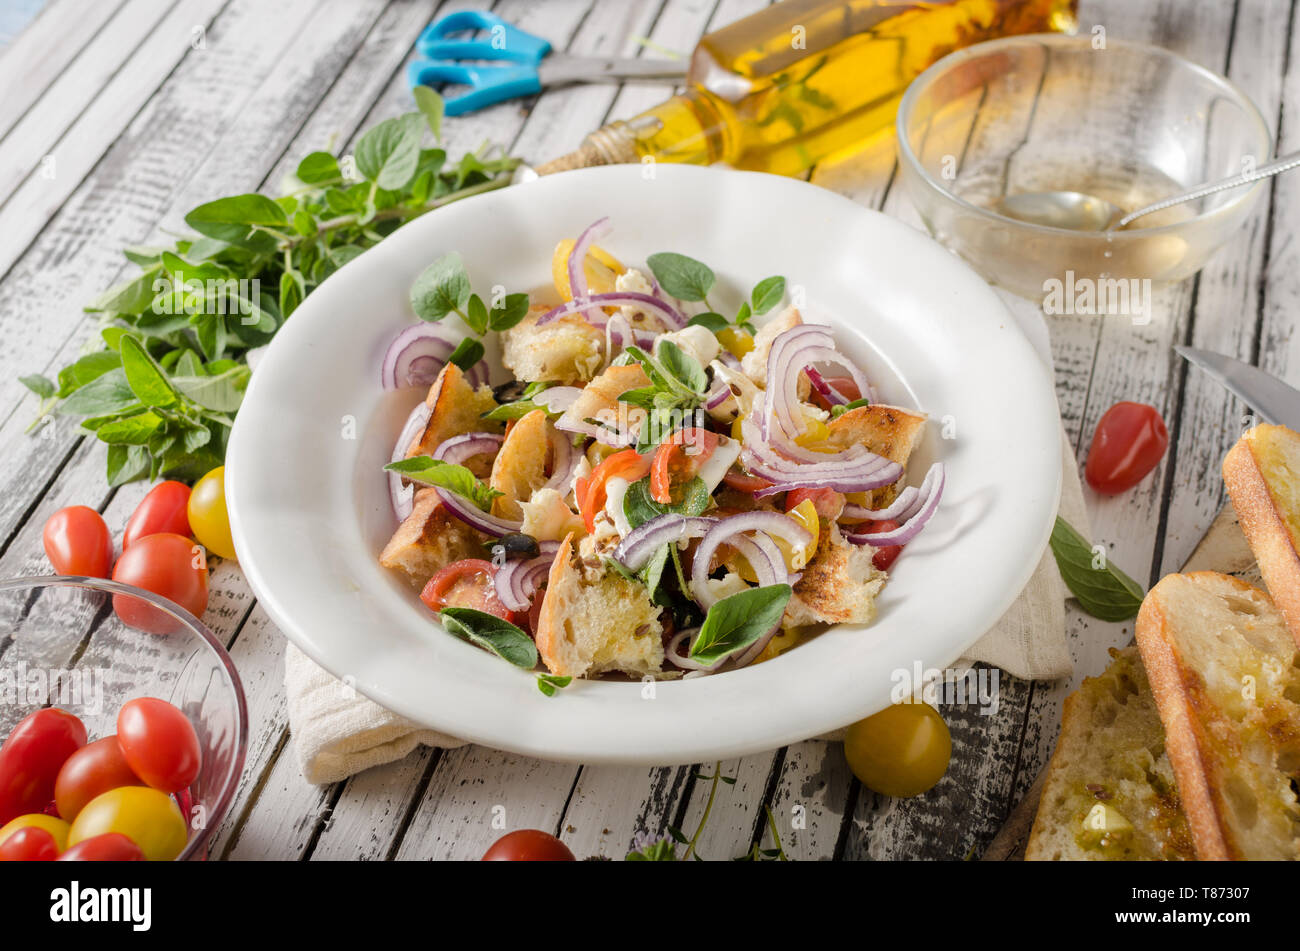 Delicious salad with fresh vegetable, crispy croutons and cheese Stock Photo